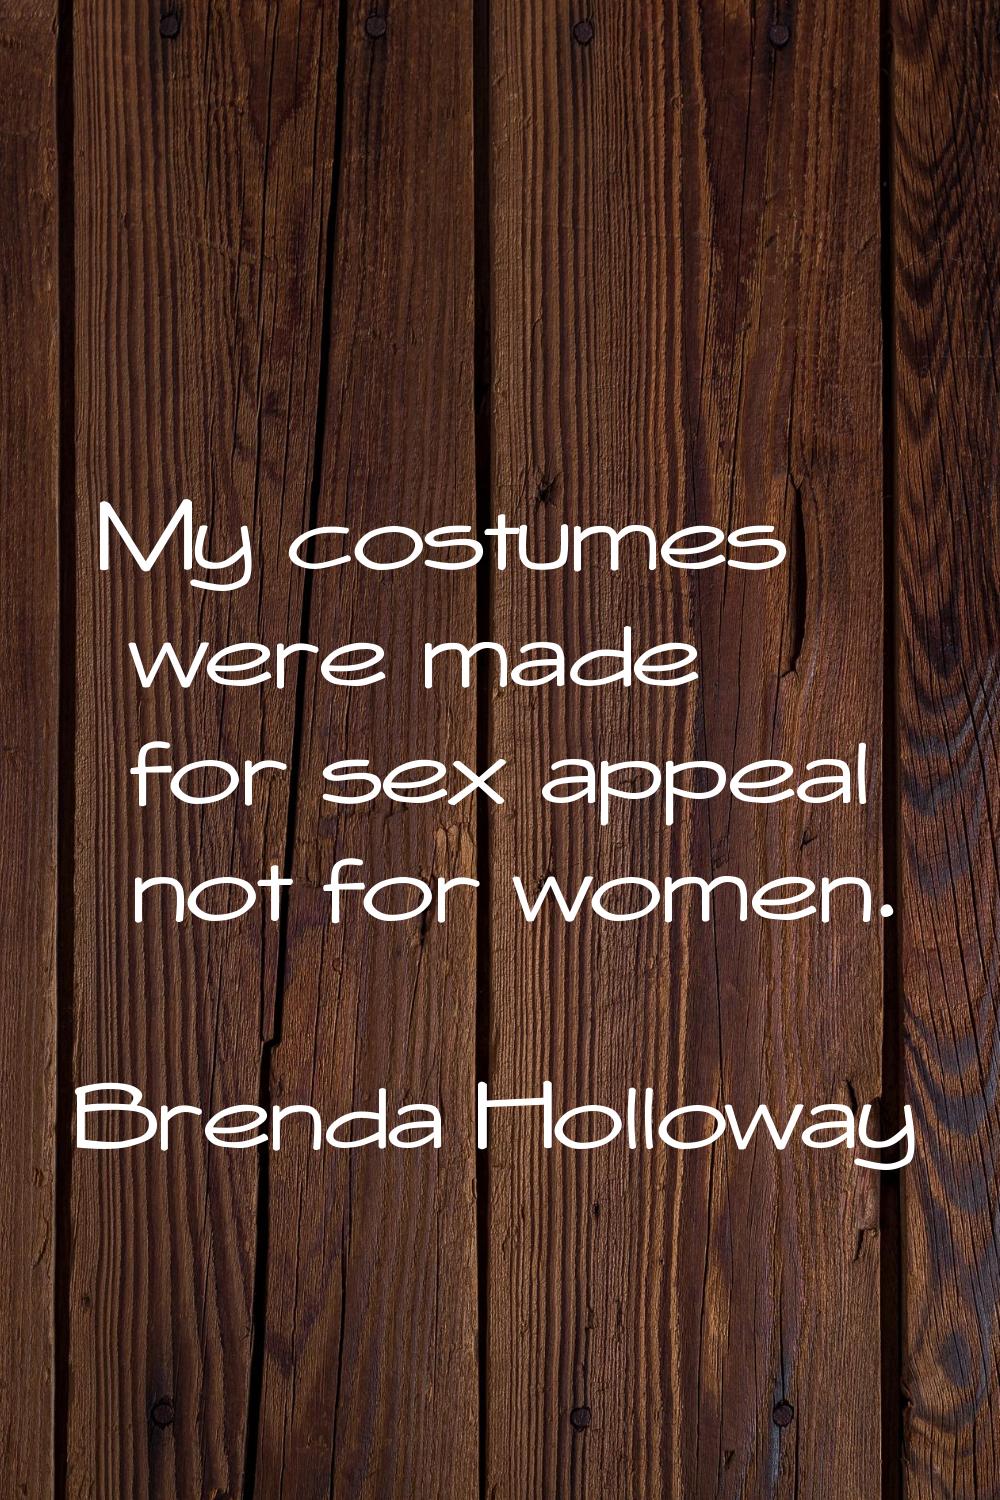 My costumes were made for sex appeal not for women.